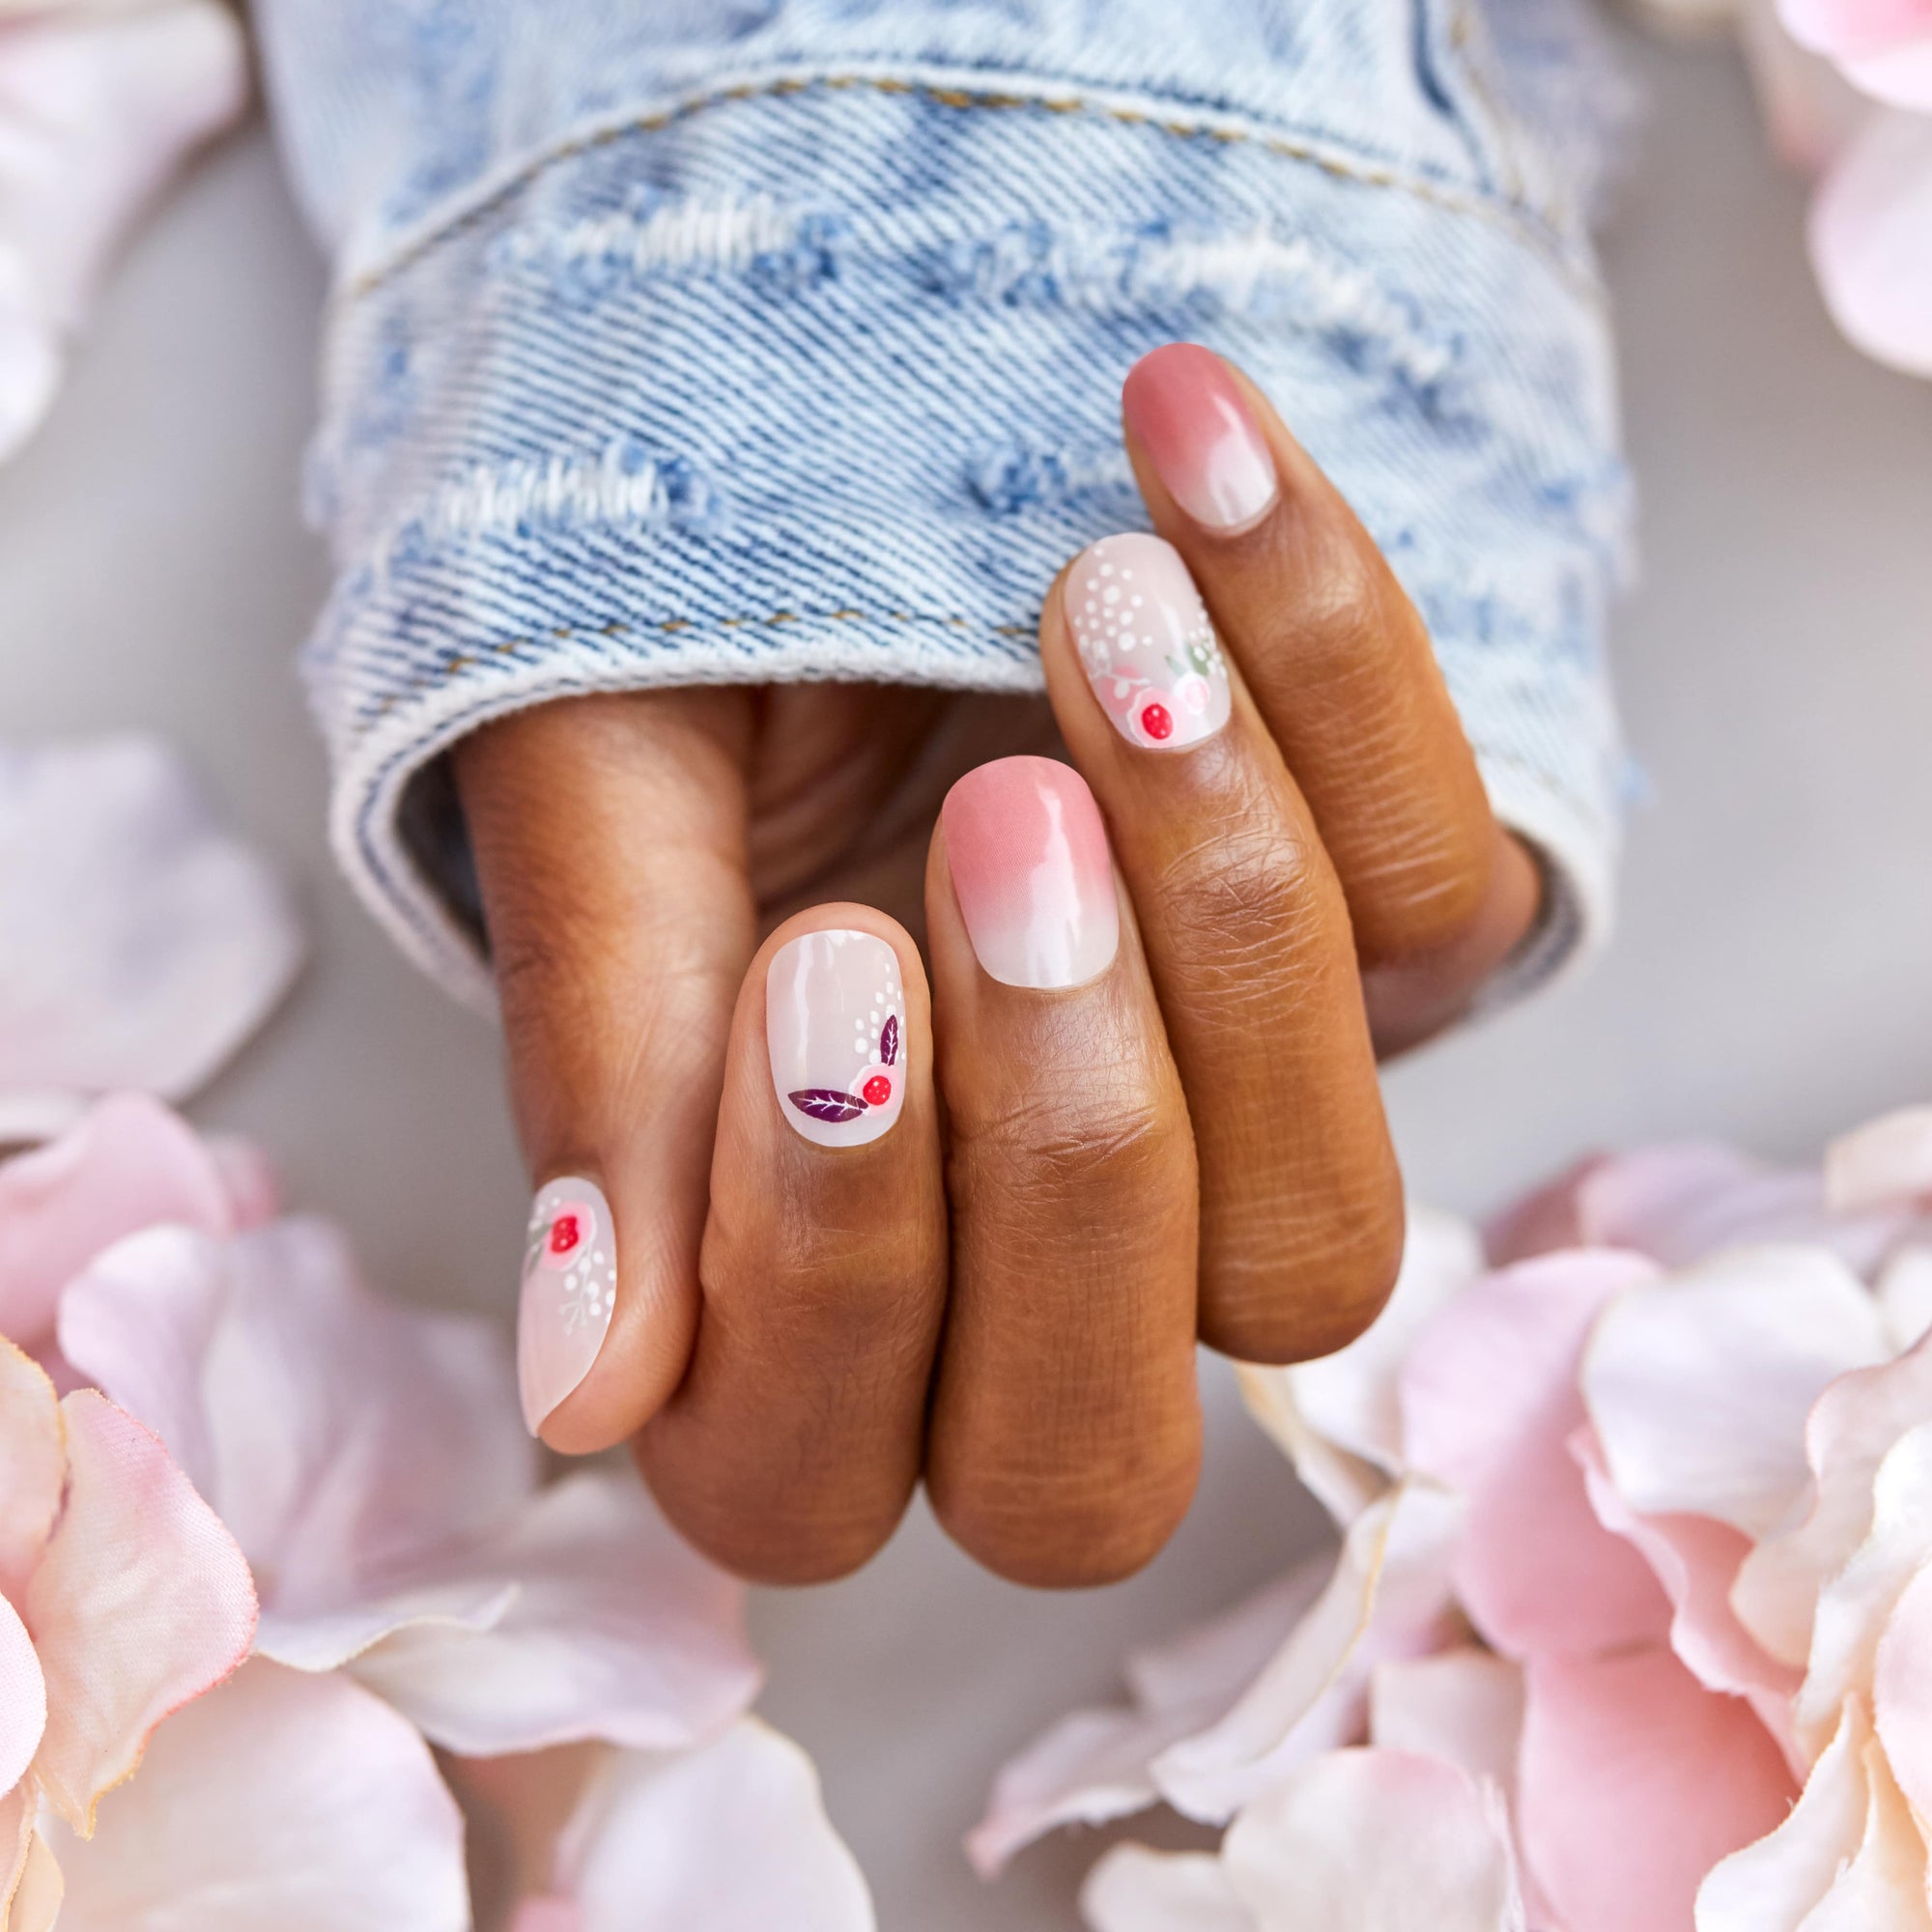 Top 10 Easter Nail Ideas to try this year | ManiMe